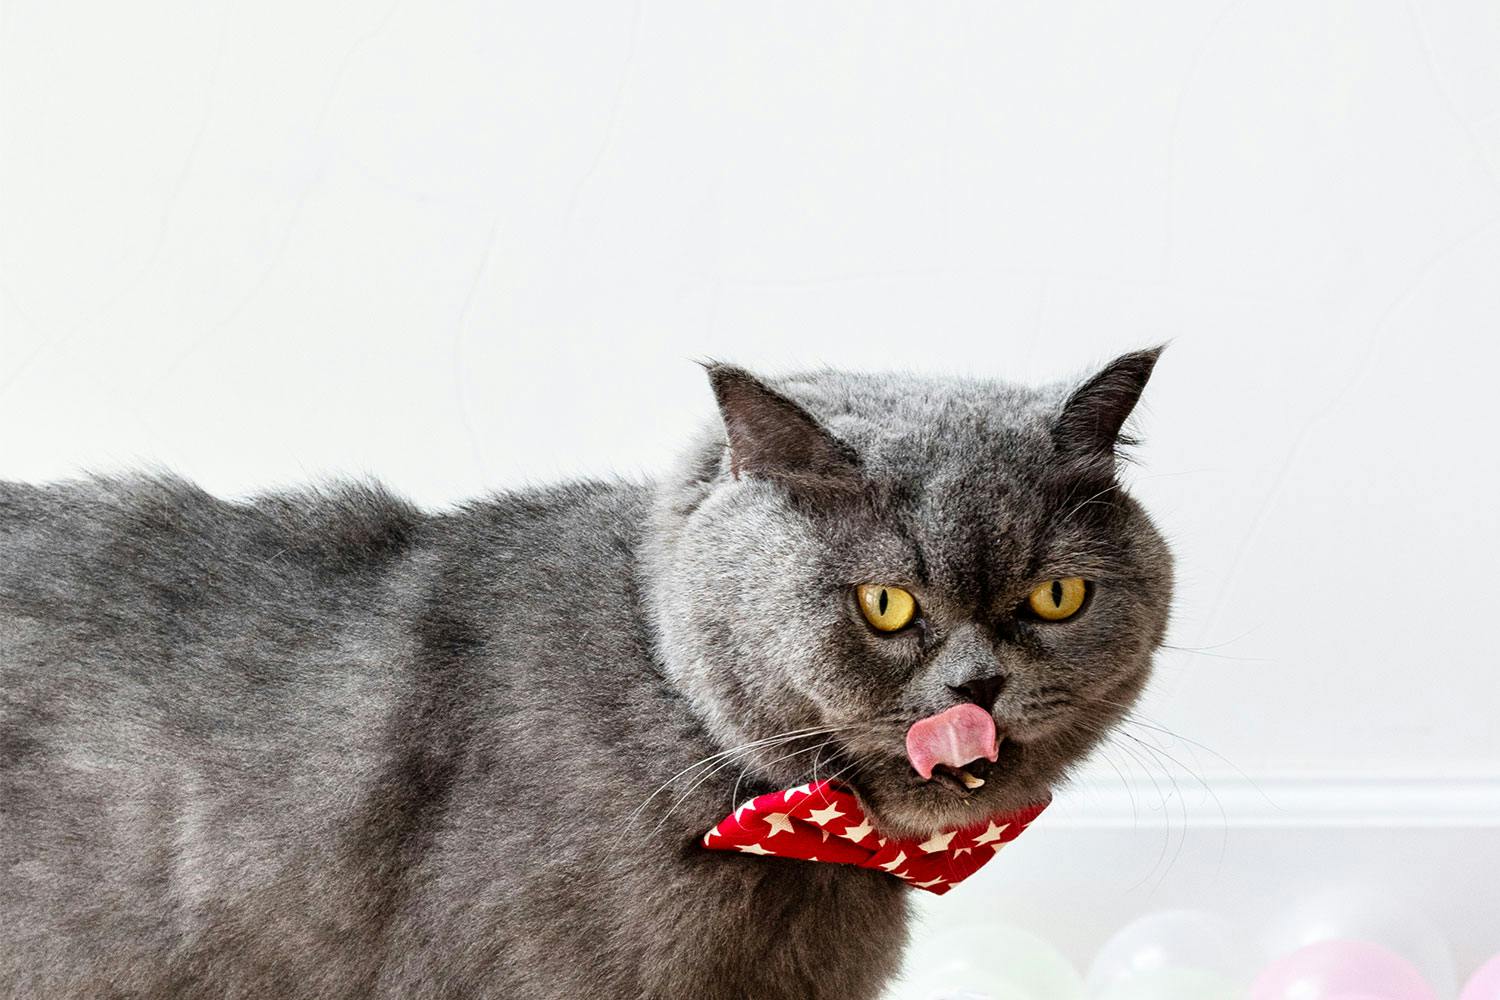 A grey cat with yellow eyes and a red bowtie with white stars licks its nose.